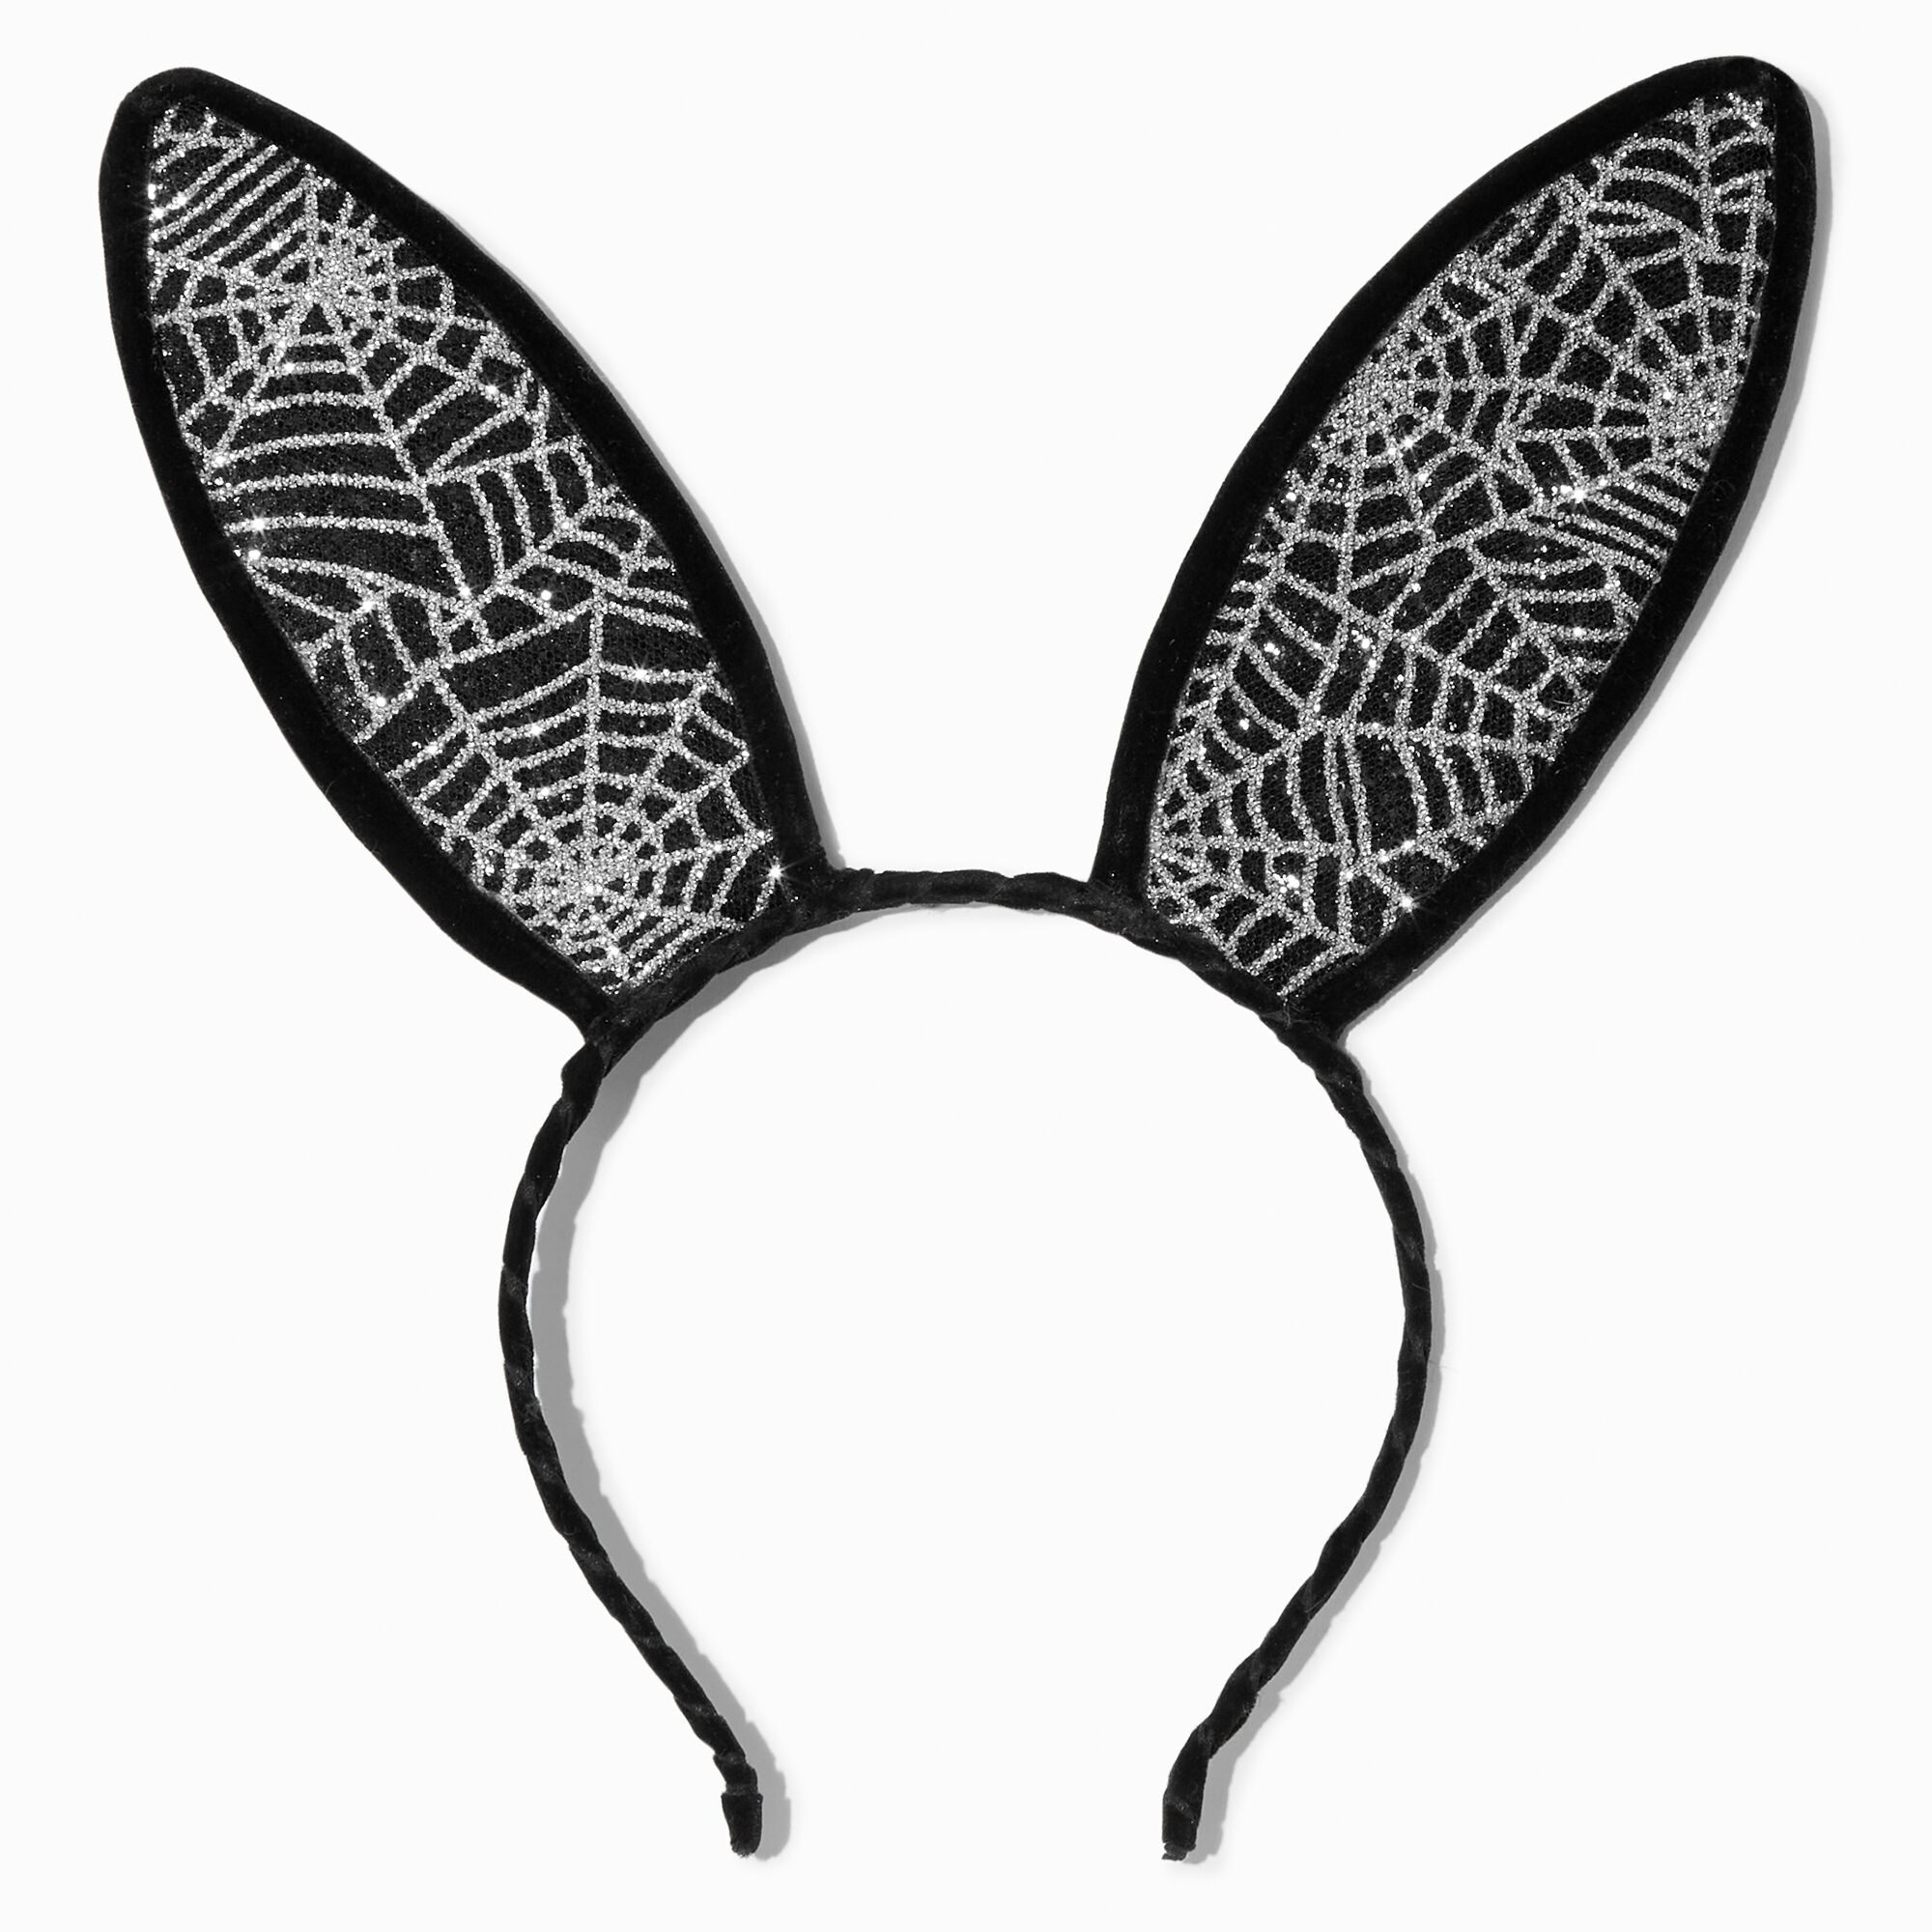 View Claires Spider Web Bunny Ears Headband information